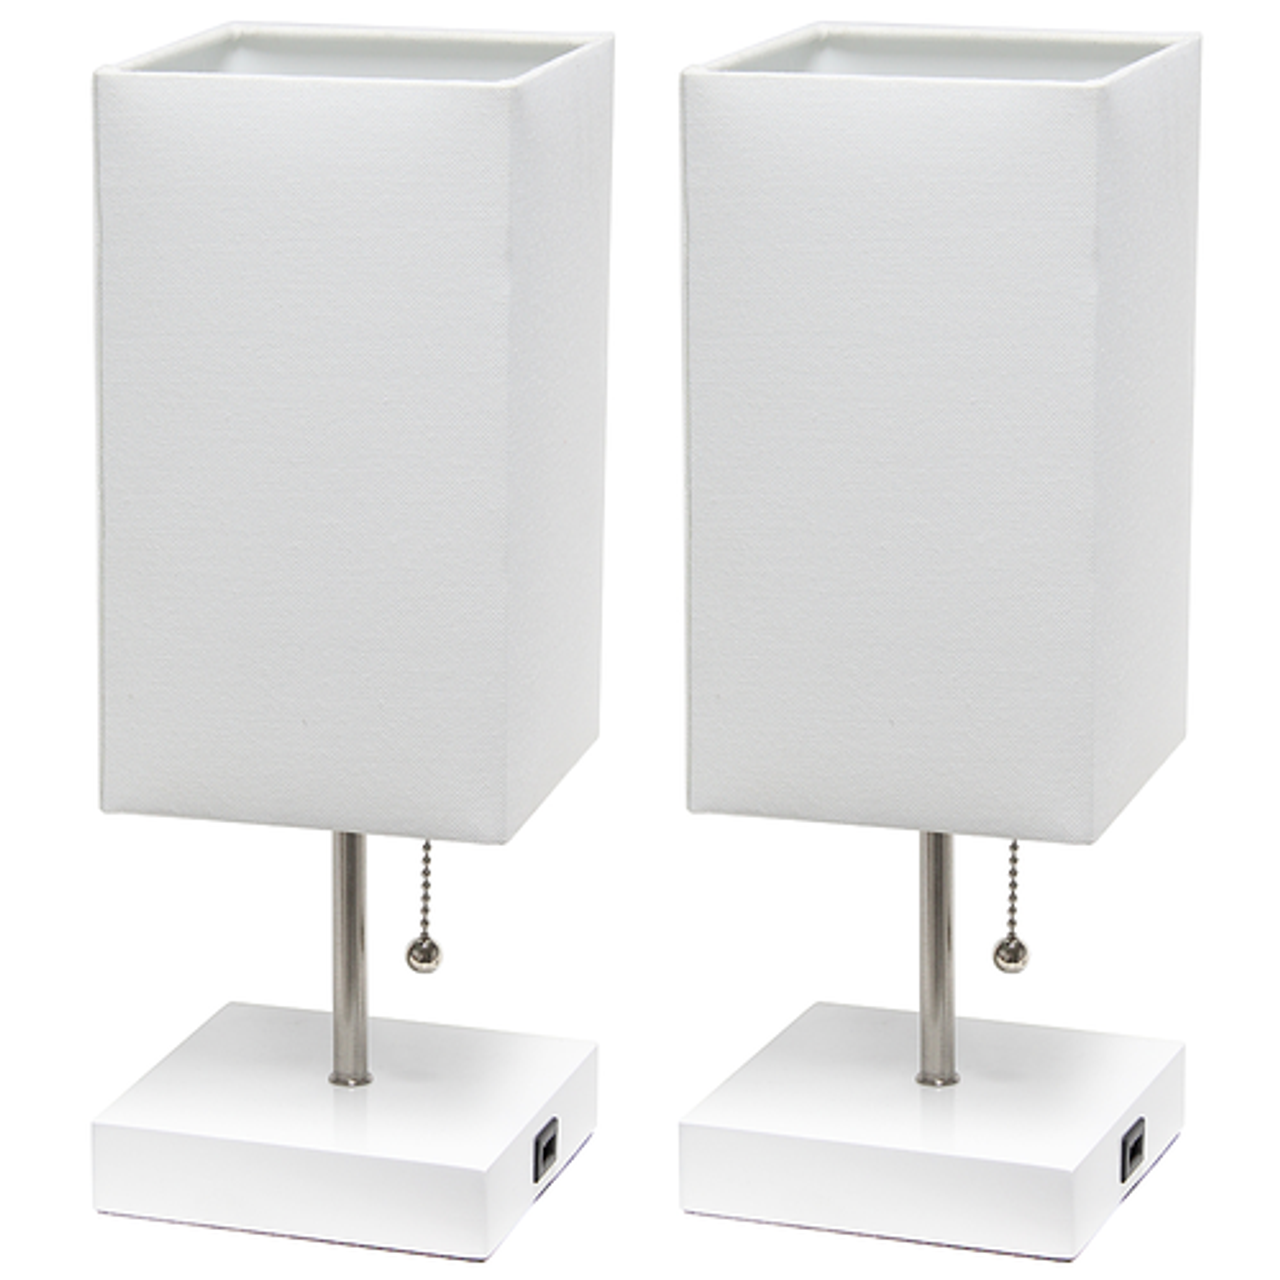 Simple Designs Petite White Stick Lamp with USB Charging Port and Fabric Shade 2 Pack Set, White - White base/White shade